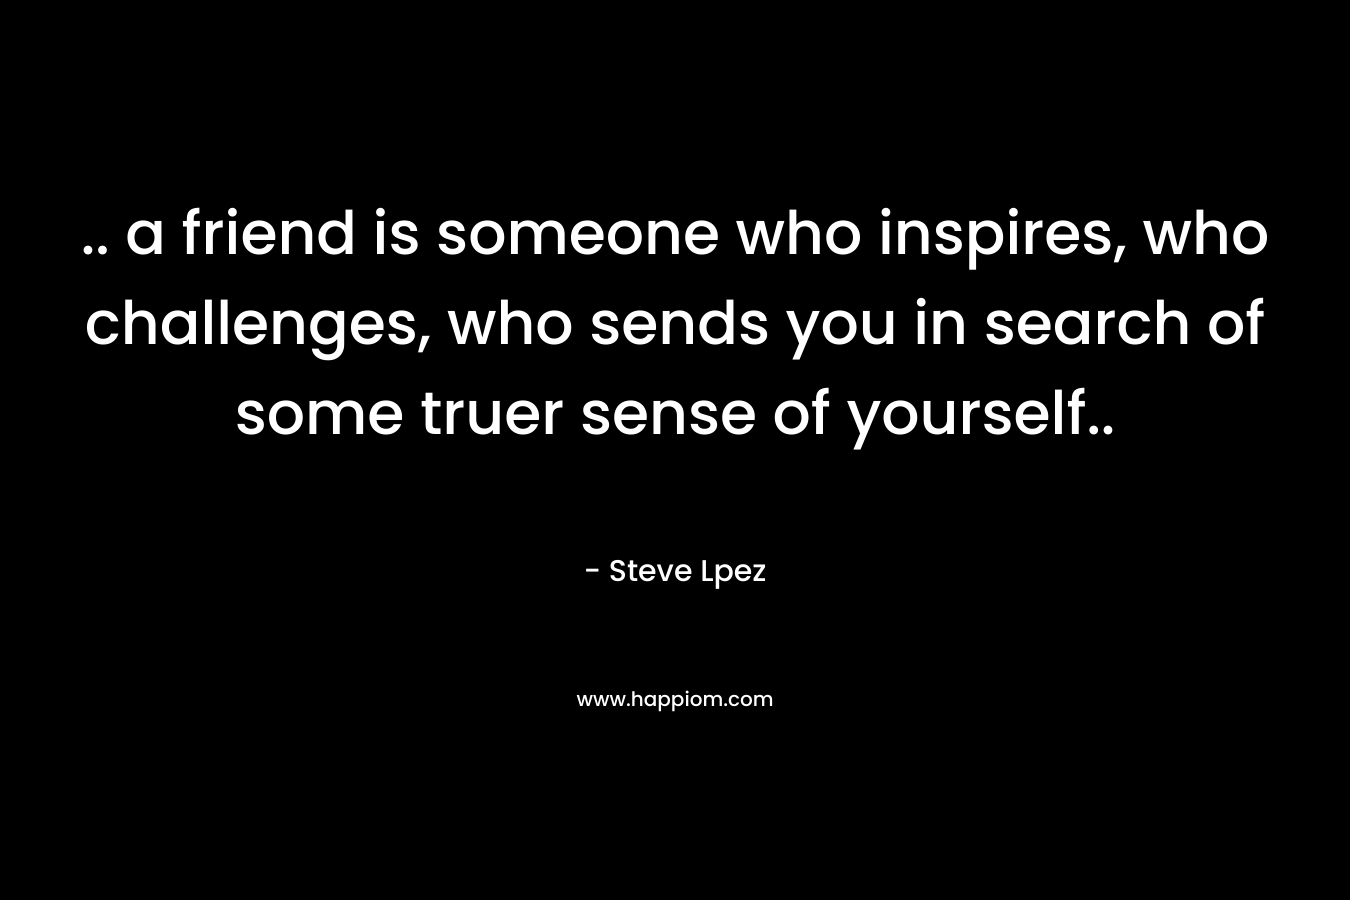 .. a friend is someone who inspires, who challenges, who sends you in search of some truer sense of yourself..